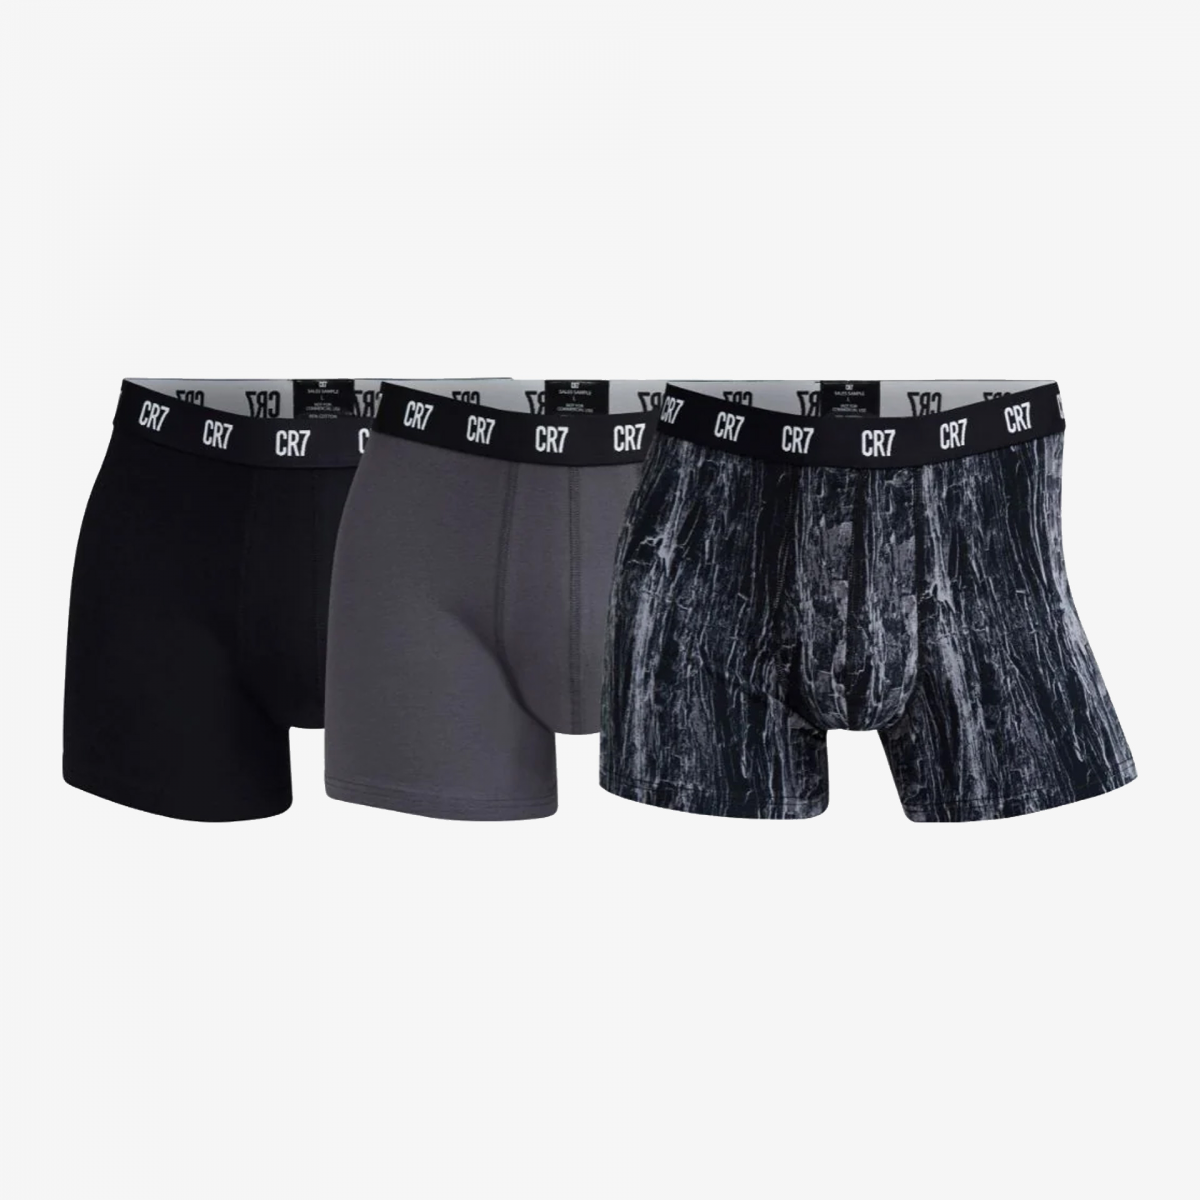 CR7 Boxers (Pack of 3) - 23059-PRETO